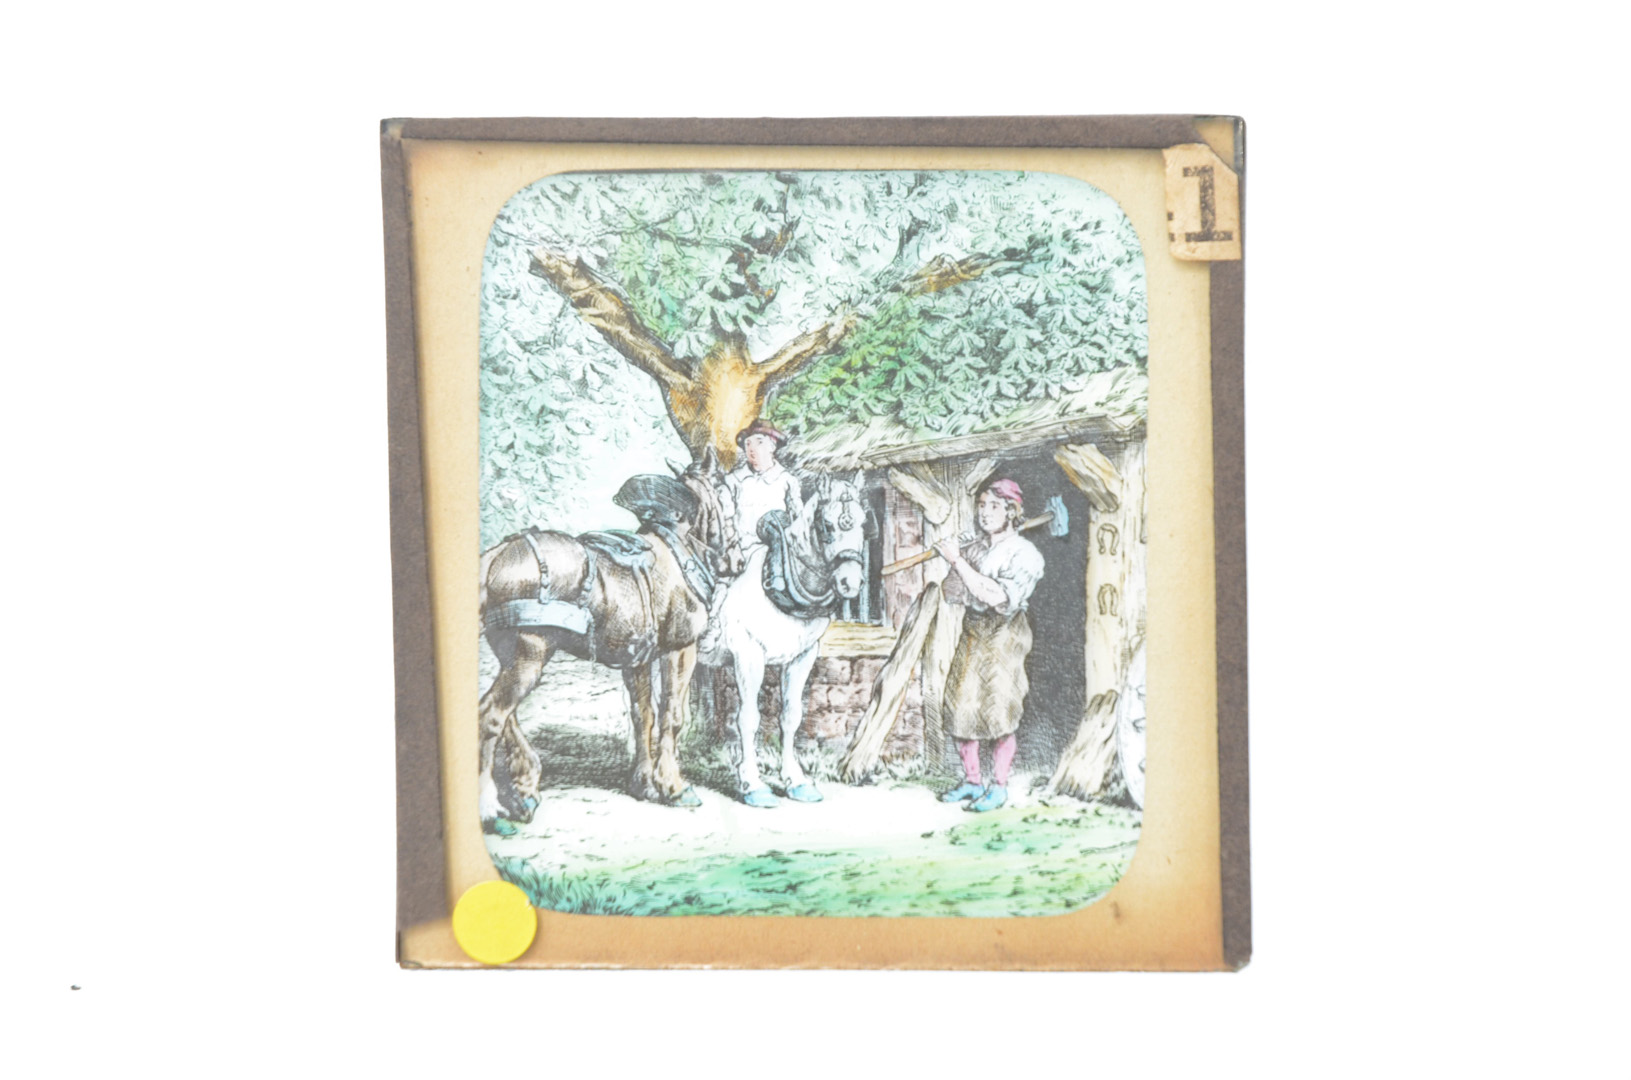 3¼in sq Magic Lantern Slides, story sets and part-sets - including 'The Three Bears', 'Cash